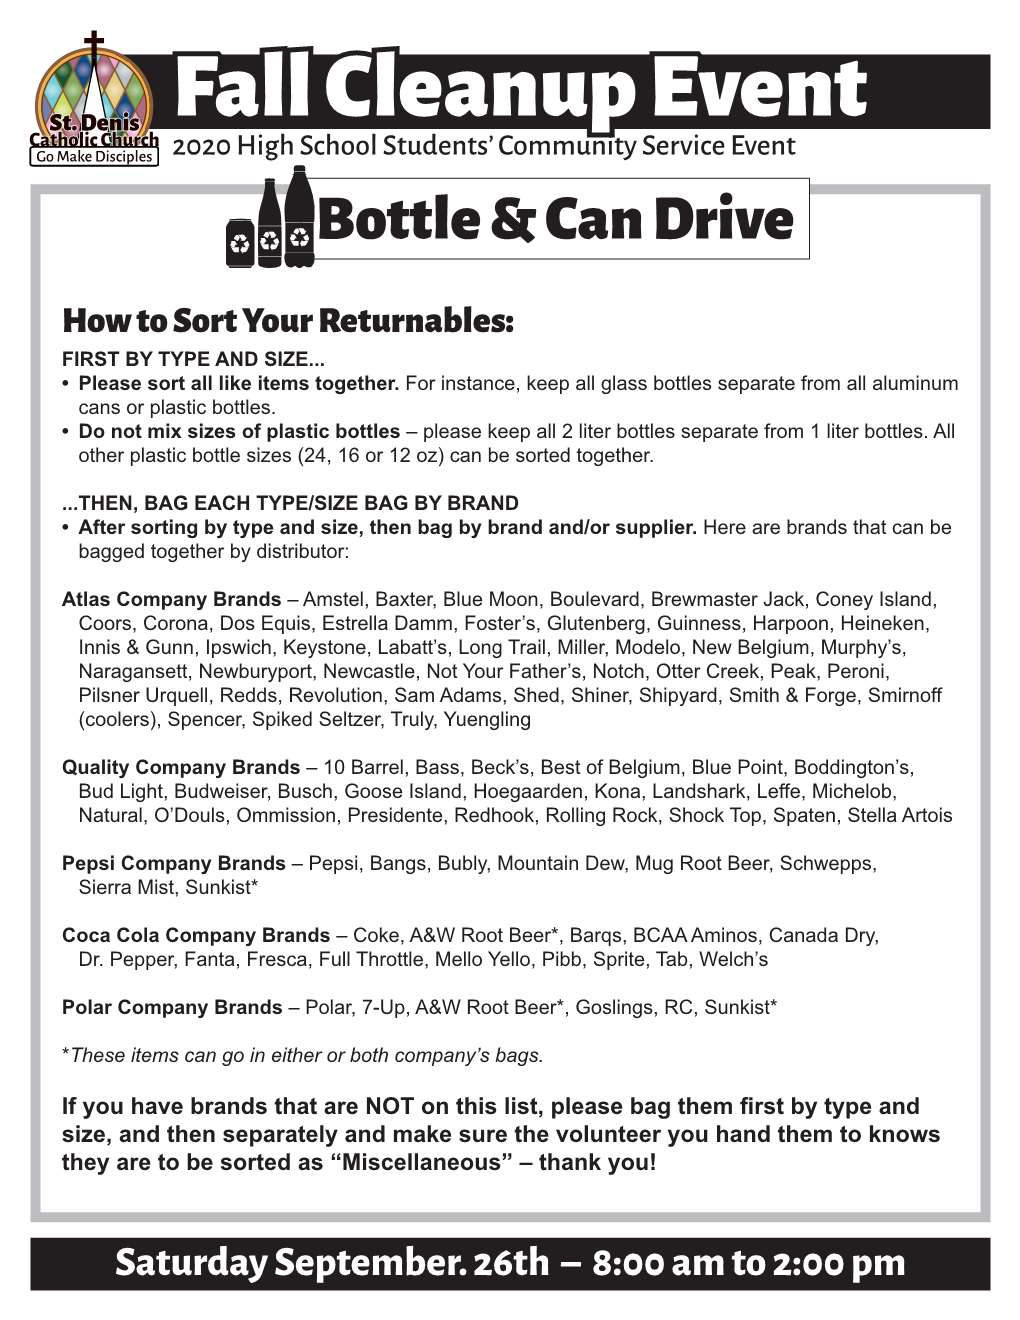 Fall Cleanup Event 2020 High School Students’ Community Service Event Bottle & Can Drive